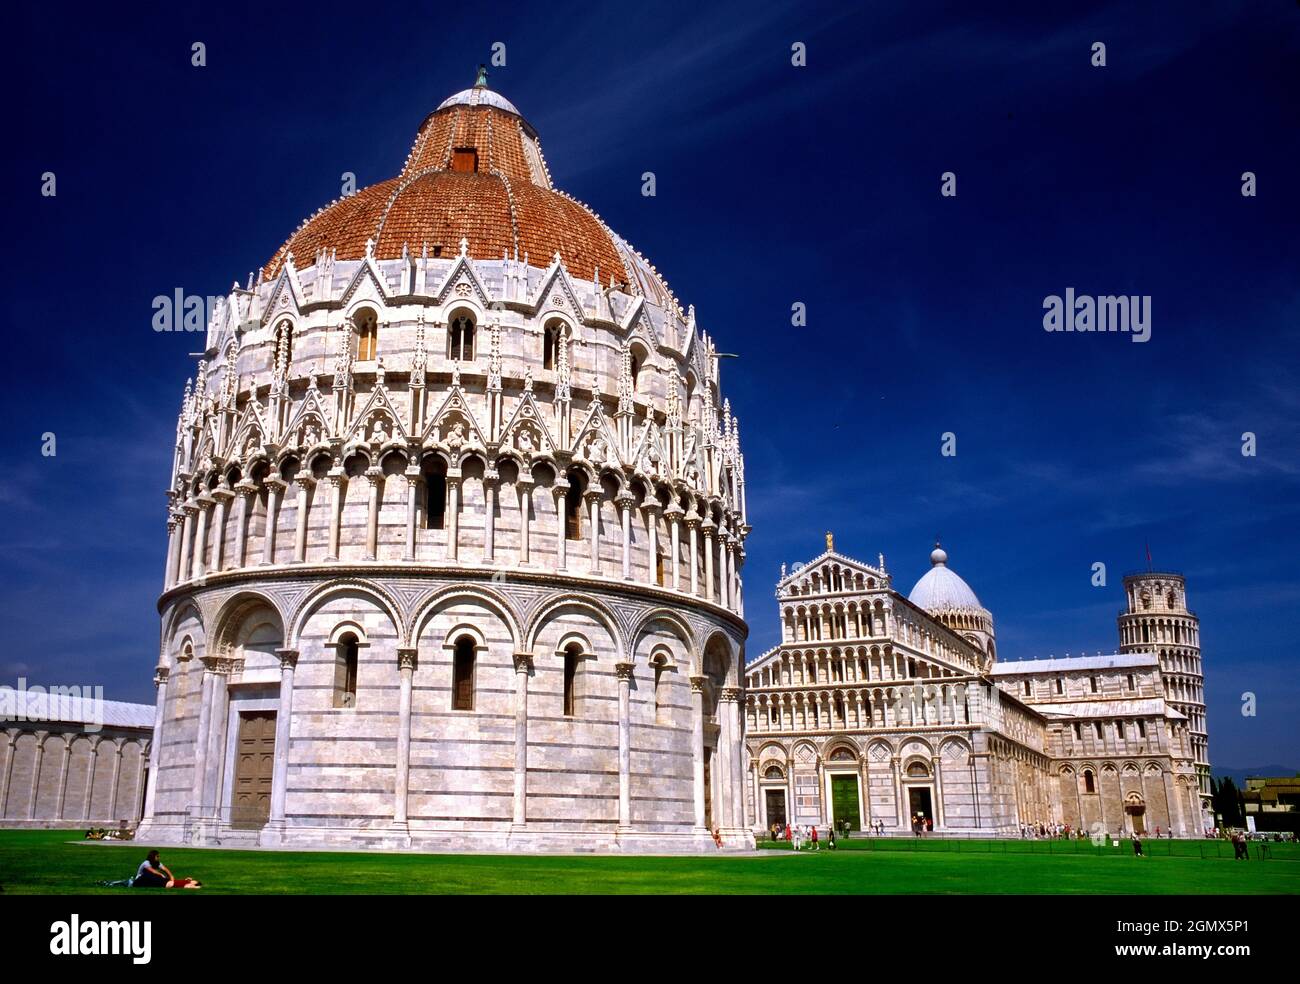 Pisa, Tuscany, Italy- February 2011;  The Piazza dei Miracoli is a walled 8.87-hectare area located in Pisa, Tuscany, recognized as sa important centr Stock Photo